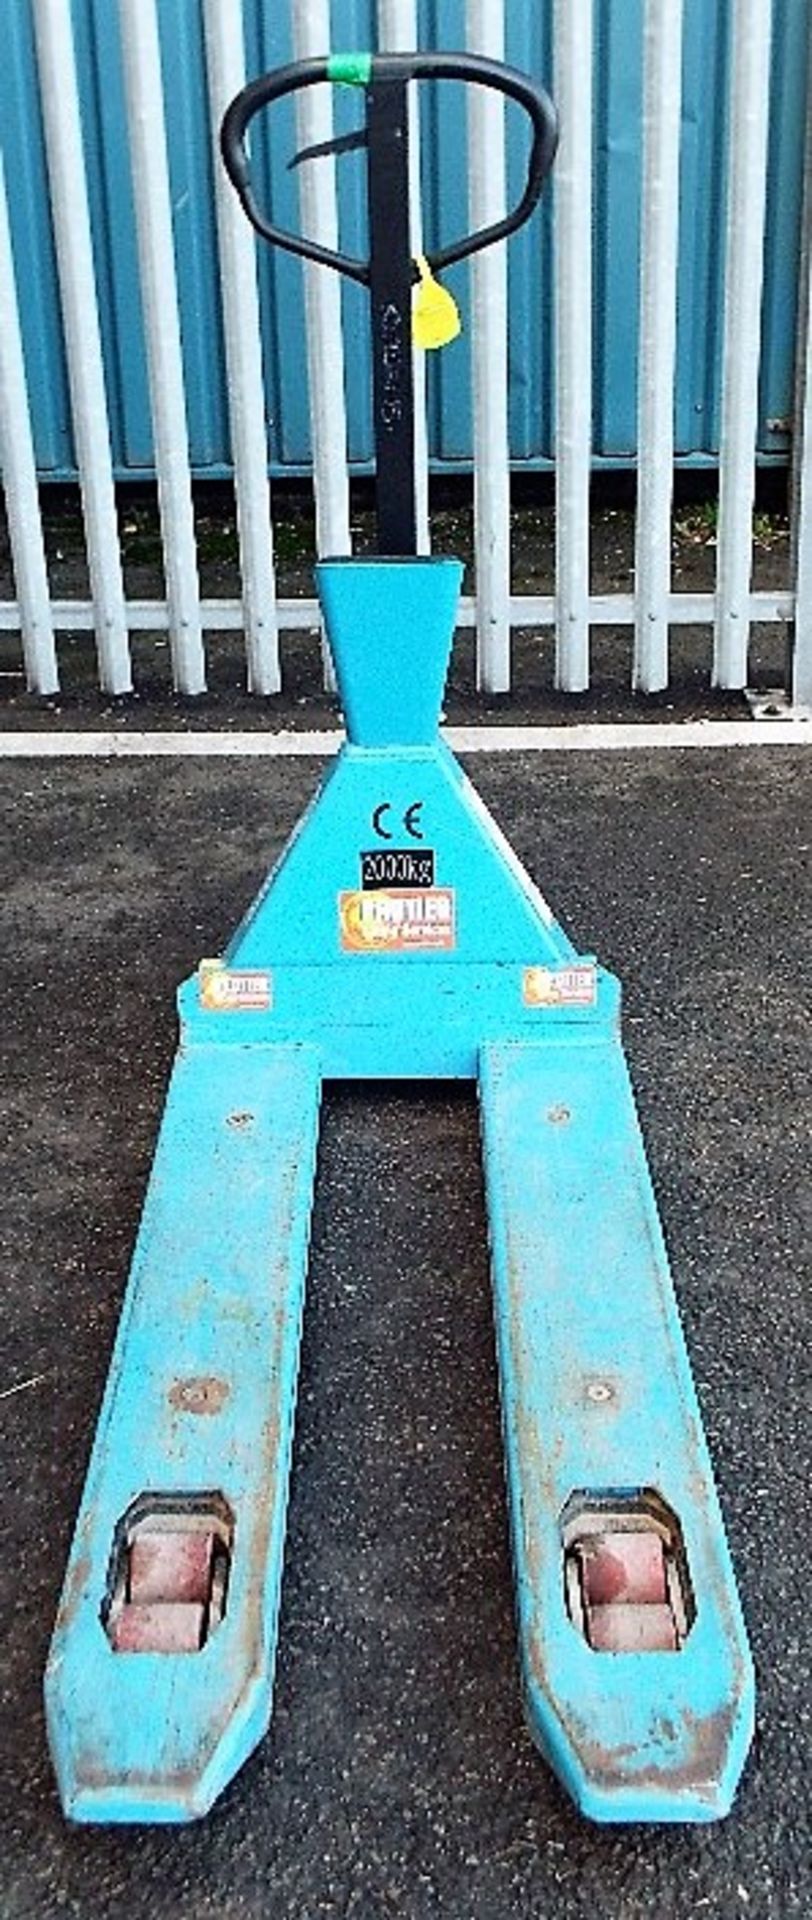 Pallet Truck With Integrated Weighing Scales.